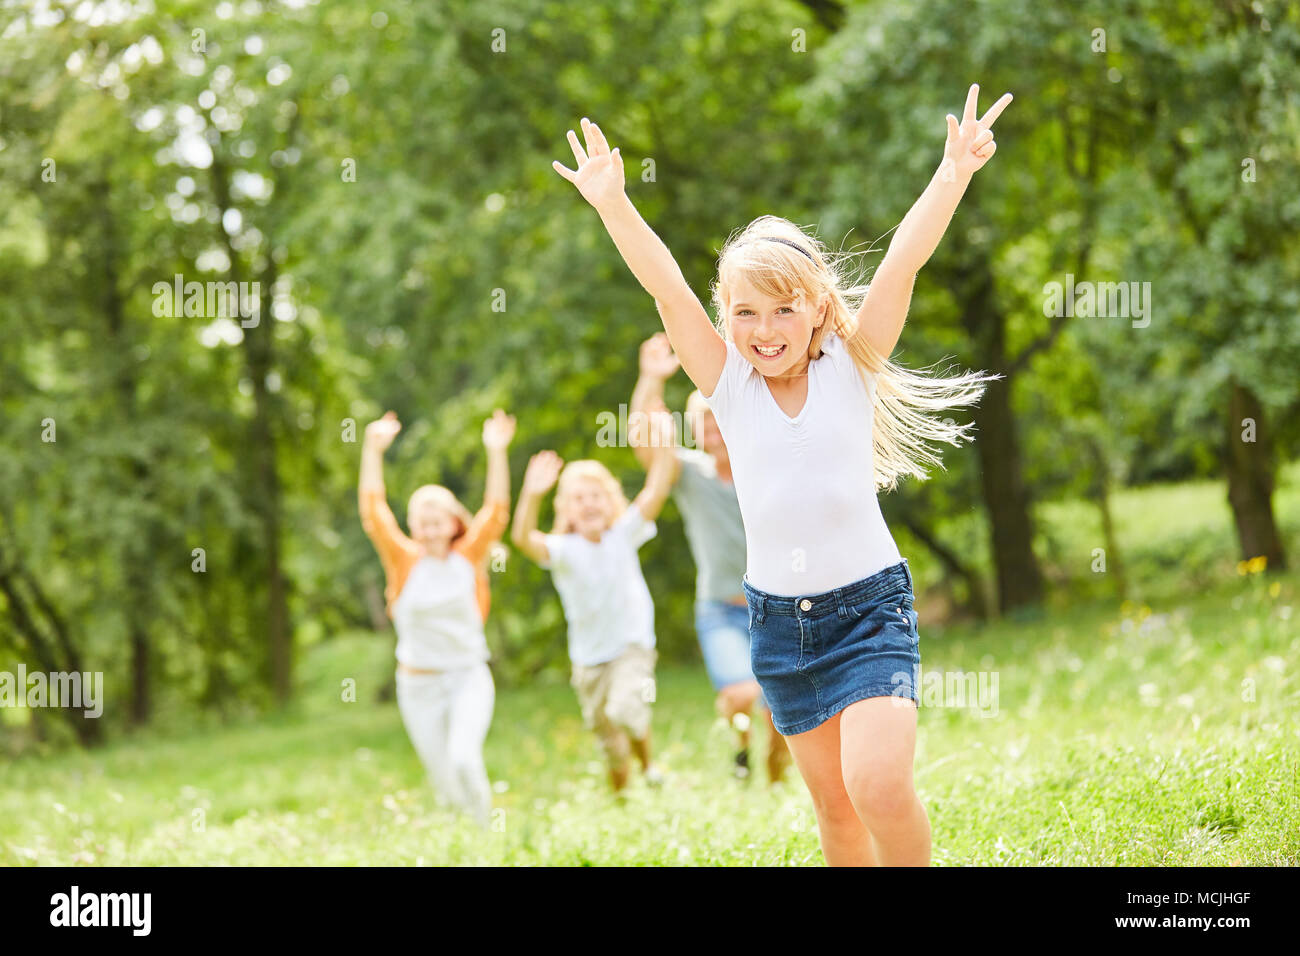 Blonde girl happily cheers on a family outing Stock Photo